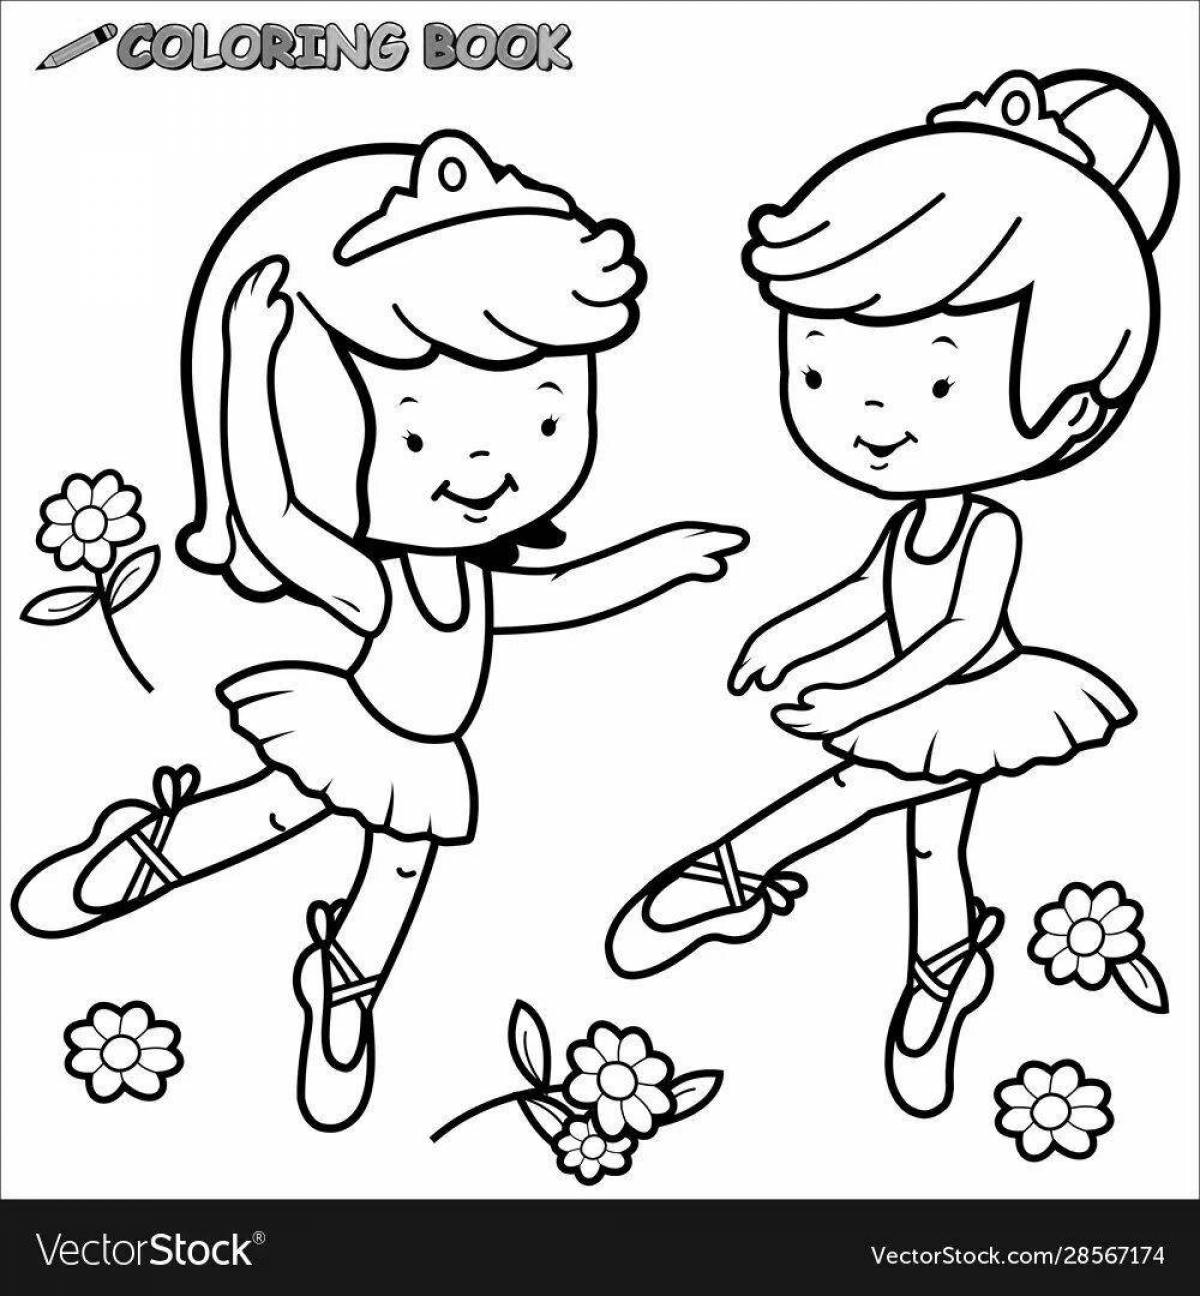 Coloring for bright dances for children